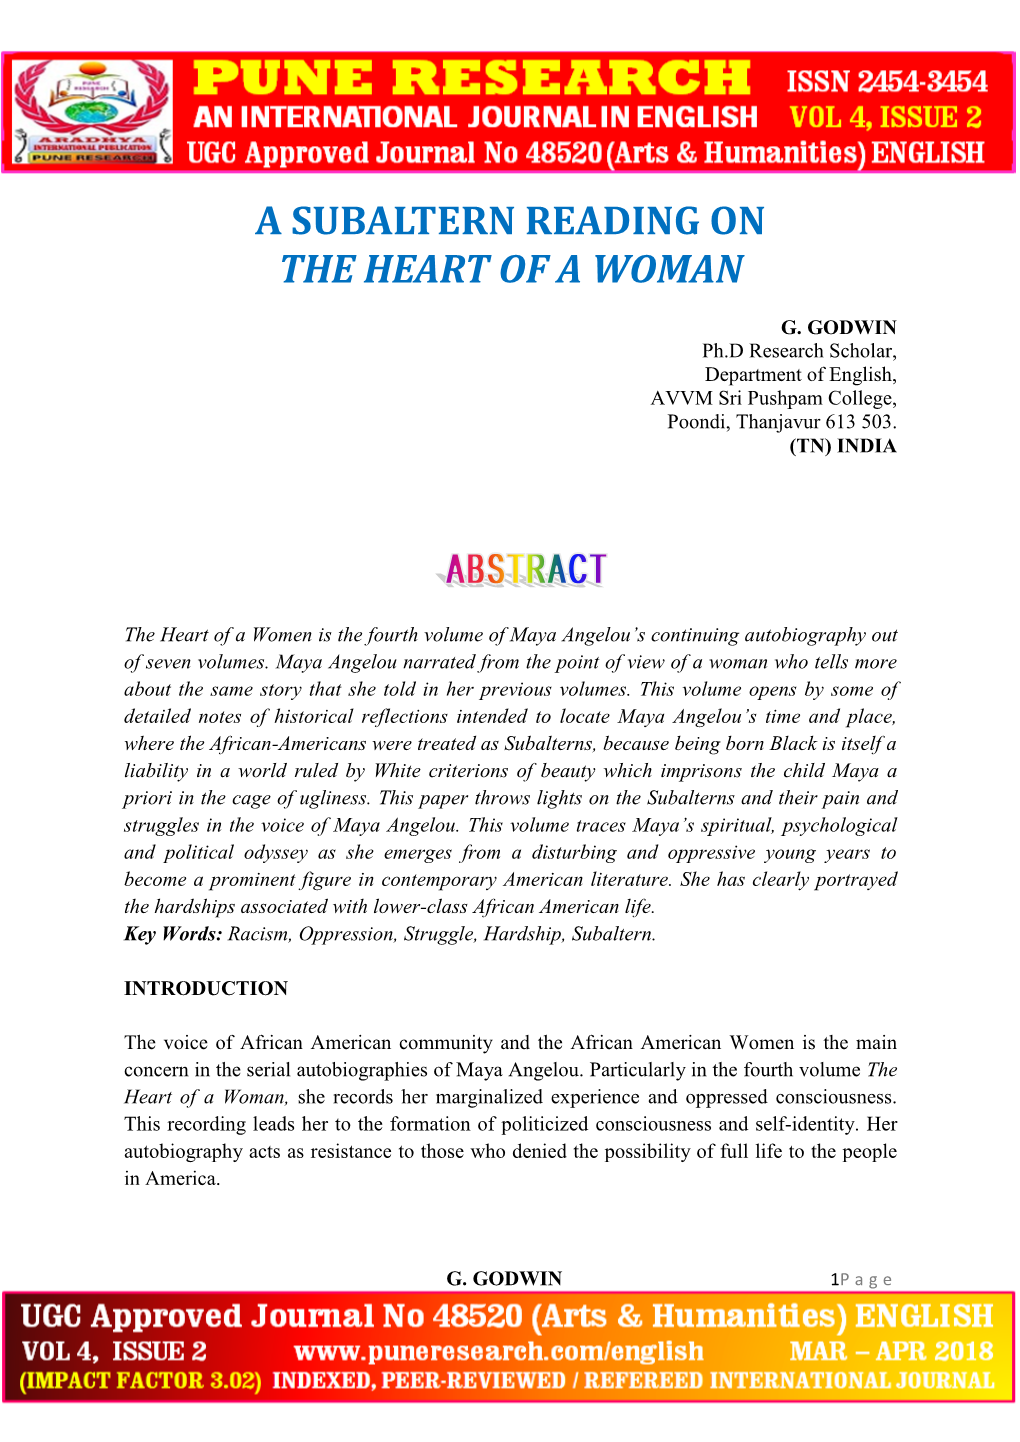 A Subaltern Reading on the Heart of a Woman